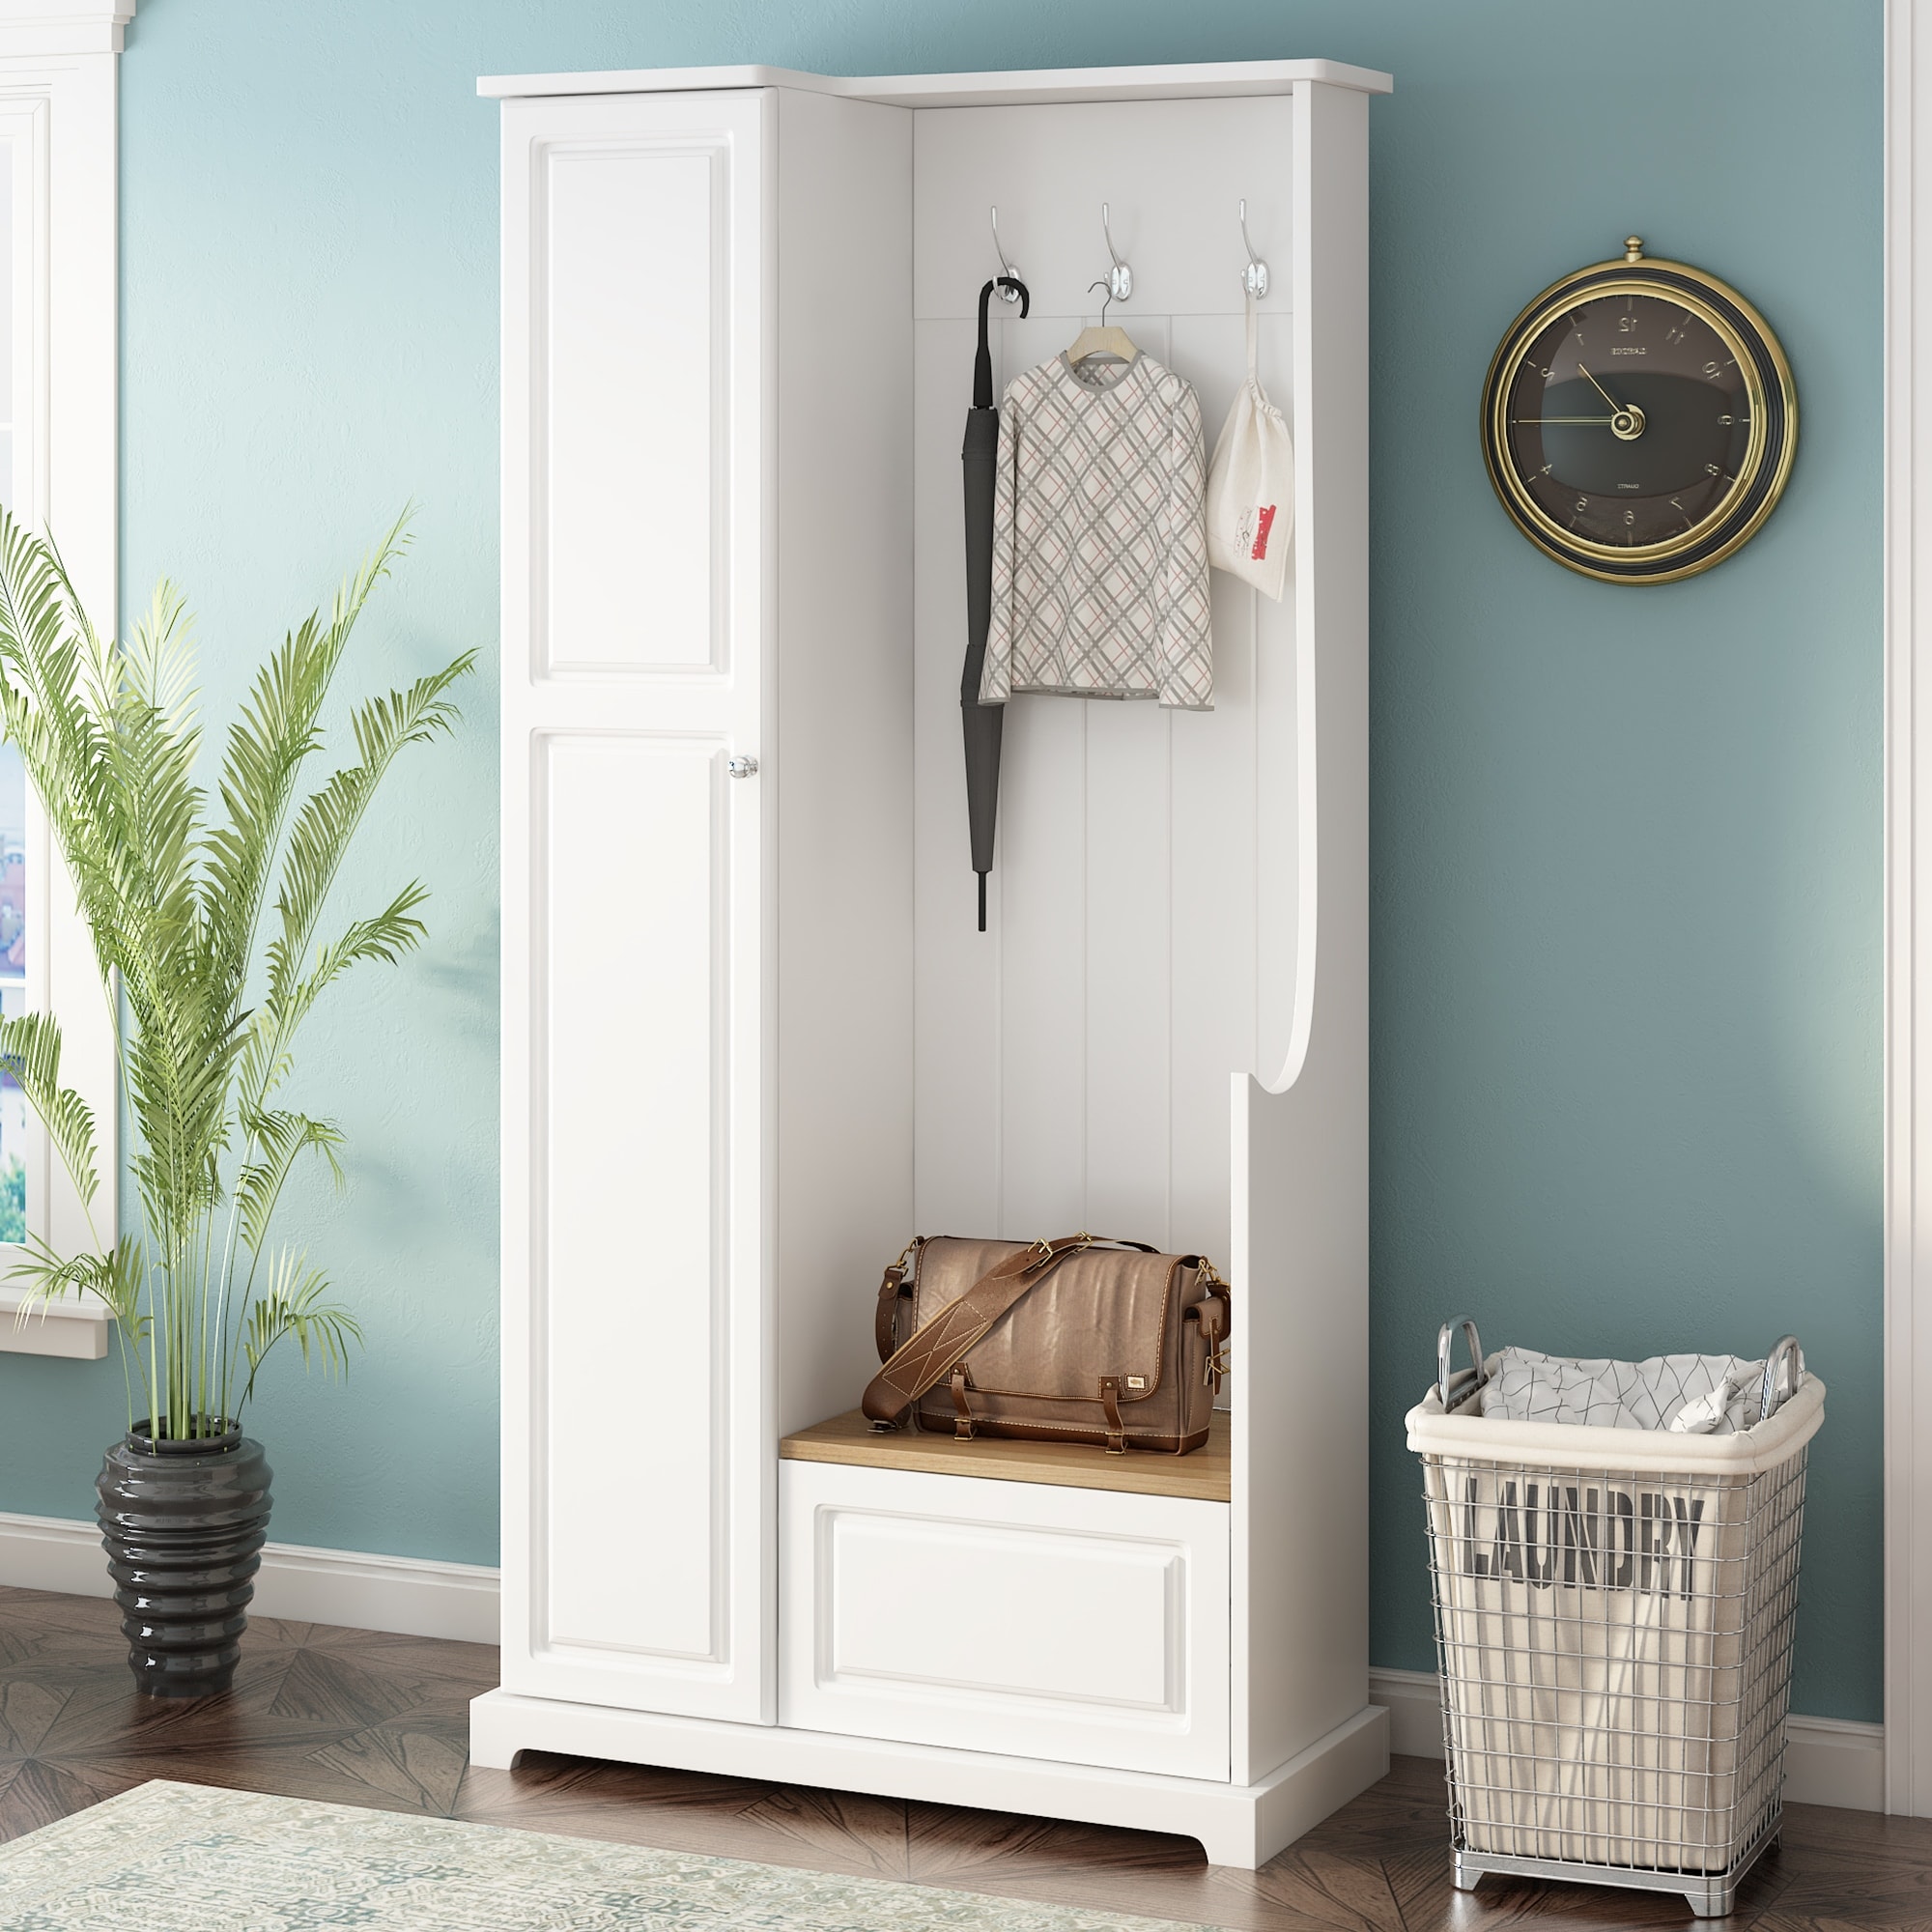 https://ak1.ostkcdn.com/images/products/is/images/direct/53ec477f70f470ee355f9d60b1d051c9bd9b434f/Hallway-Hall-Tree-White-Shoe-Cabinet-with-Flip-Up-Bench-and-Adjustable-Shelves-Storage-Wardrobe-for-Entryway%2C-Mudroom.jpg